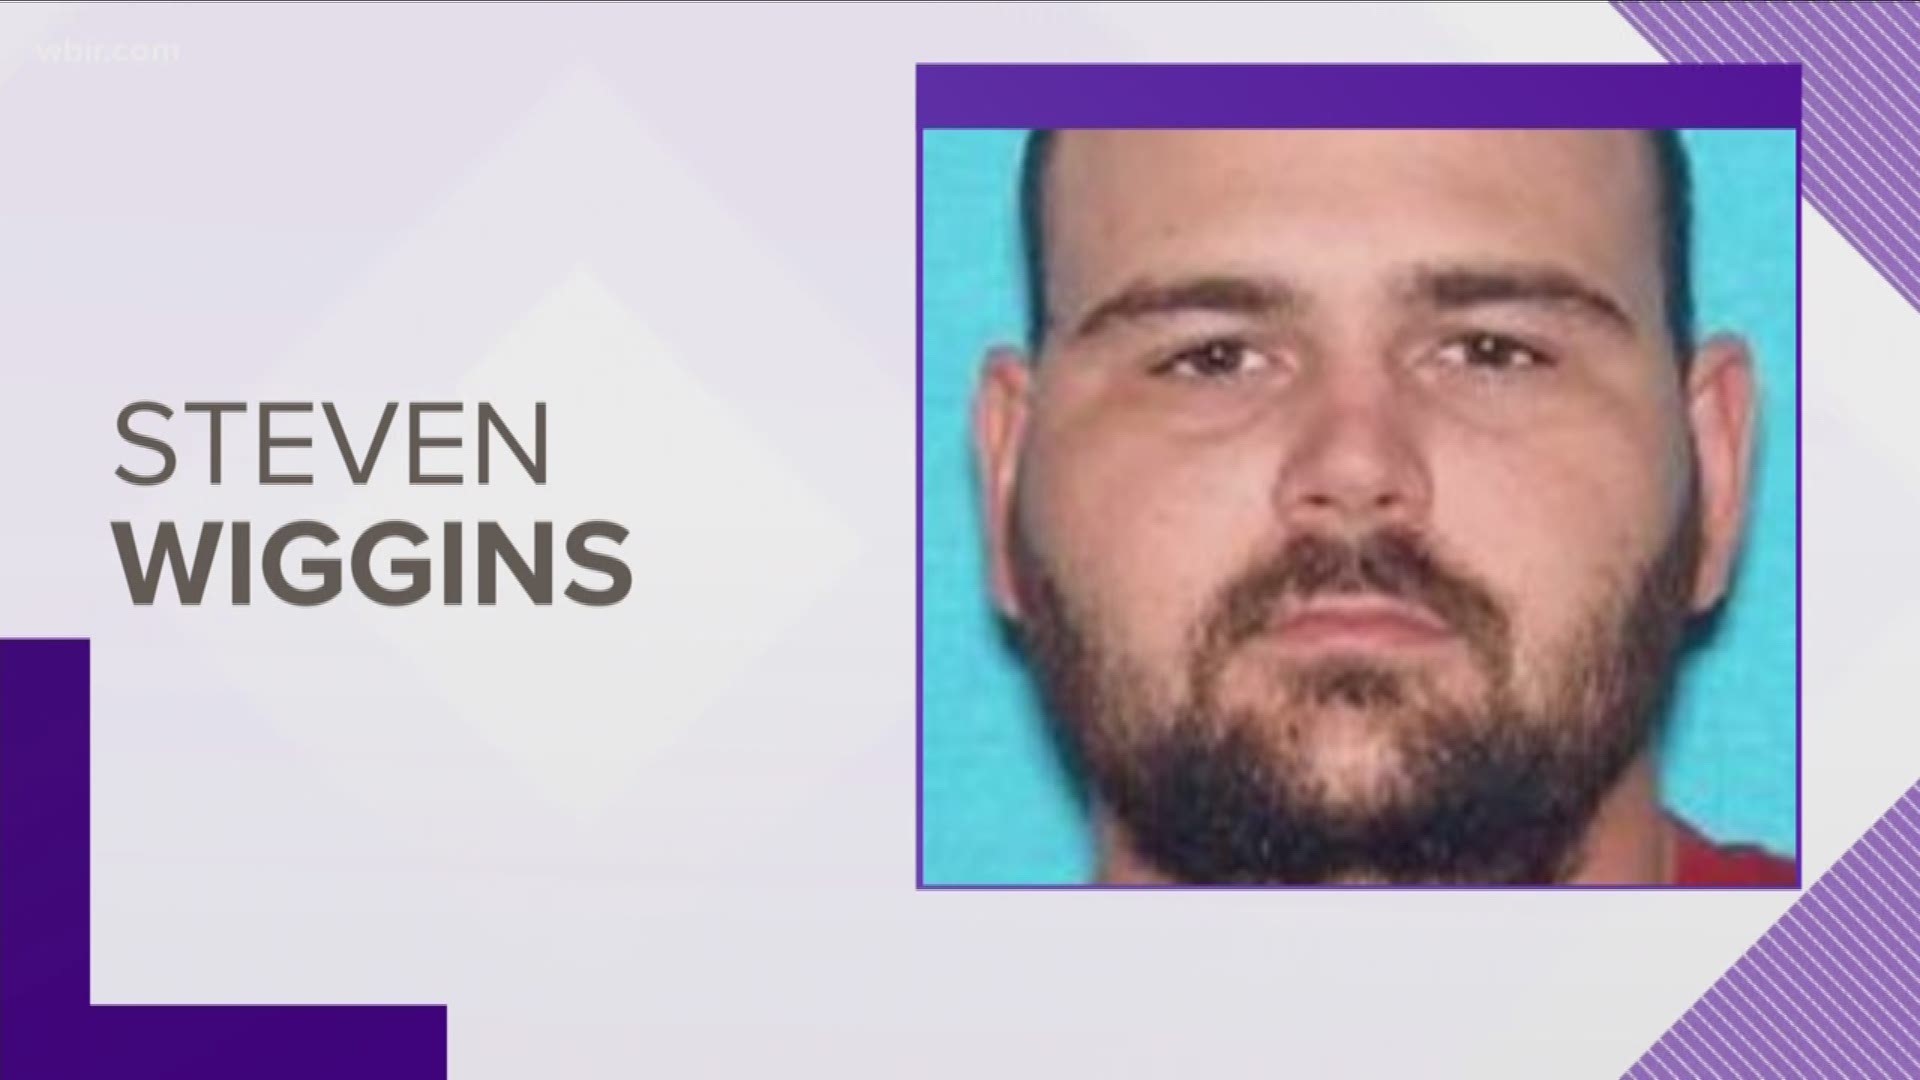 Authorities say the search continues for Steven Wiggins, the man suspected of first-degree murder in the death of a Dickson County deputy in Middle Tennessee.